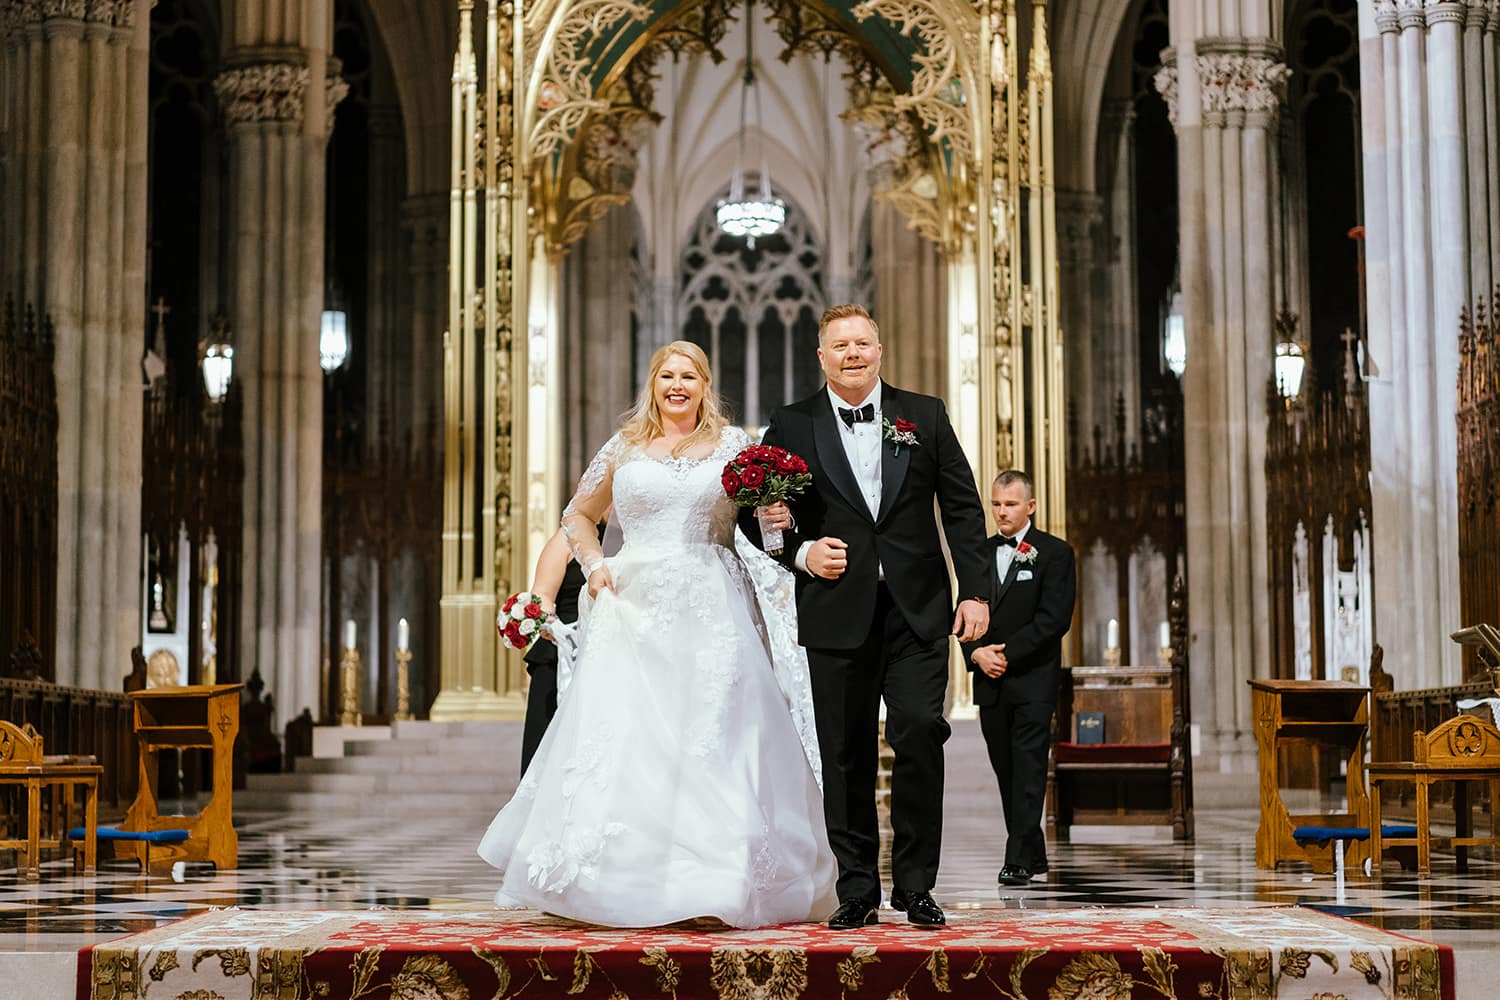 Bride and groom celebrating their marriage at St Patrick’s Cathedral